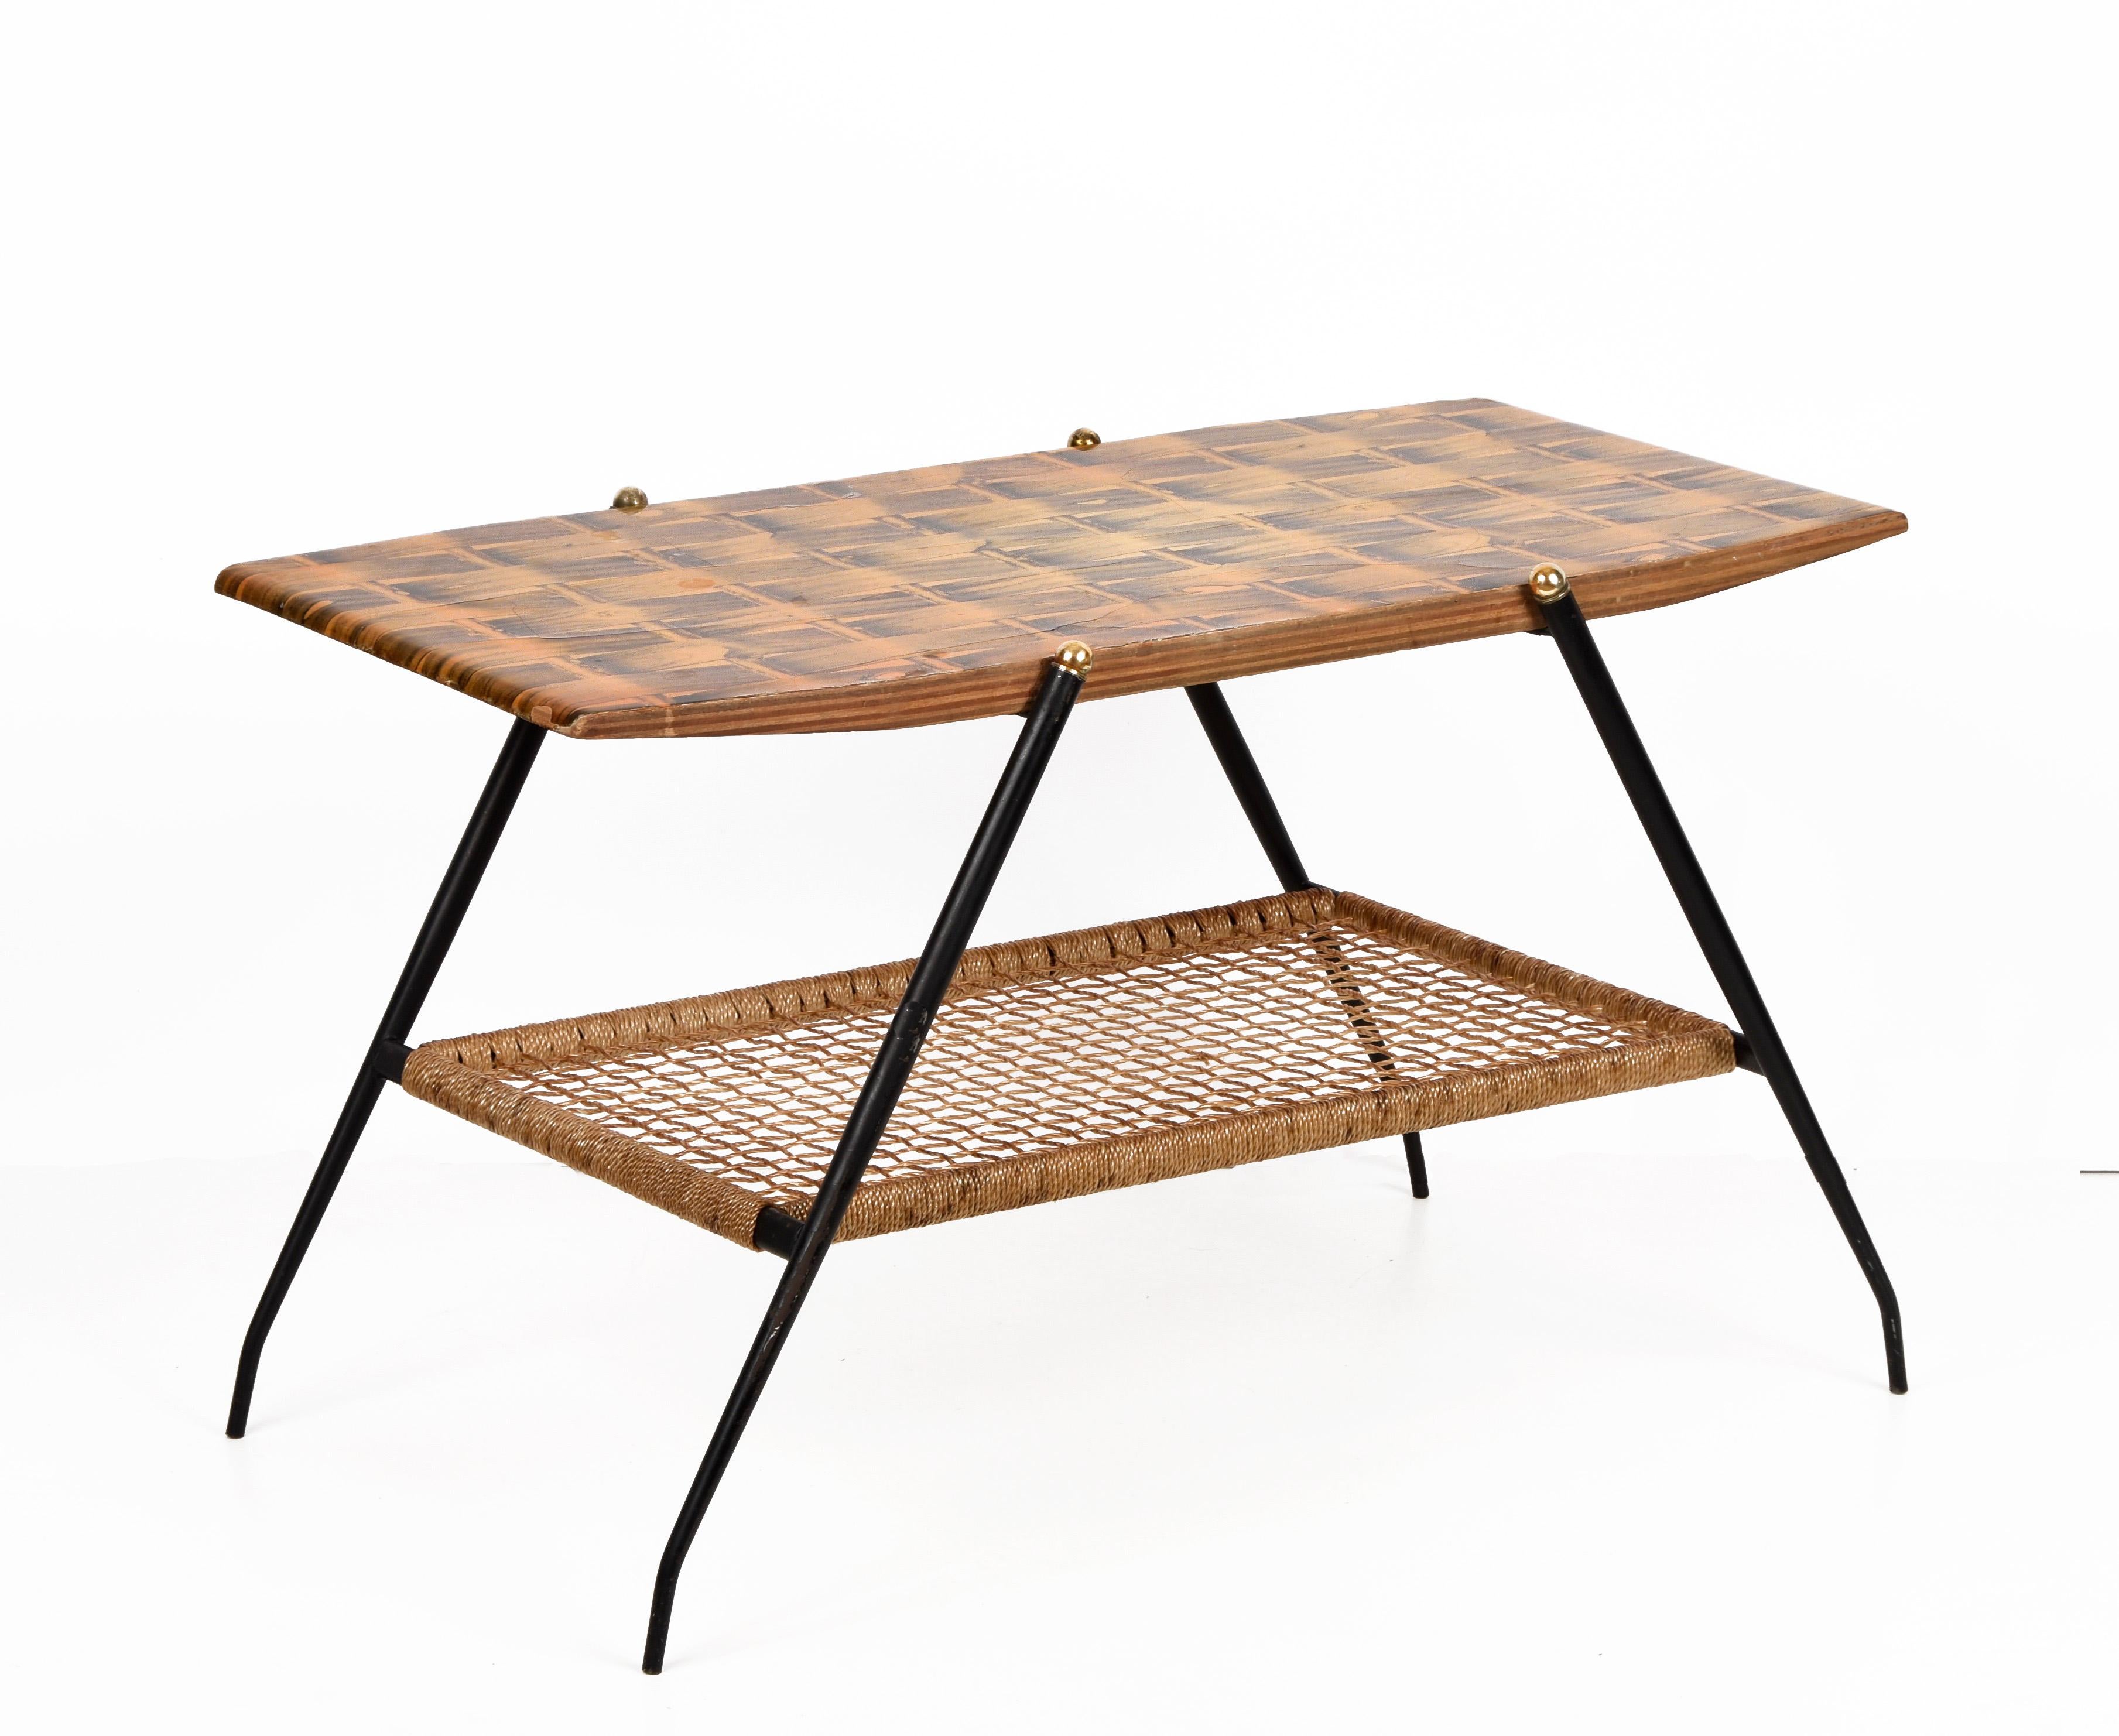 Midcentury Wood and Metal Italian Coffee Table with Brass Magazine Rack, 1950s For Sale 2